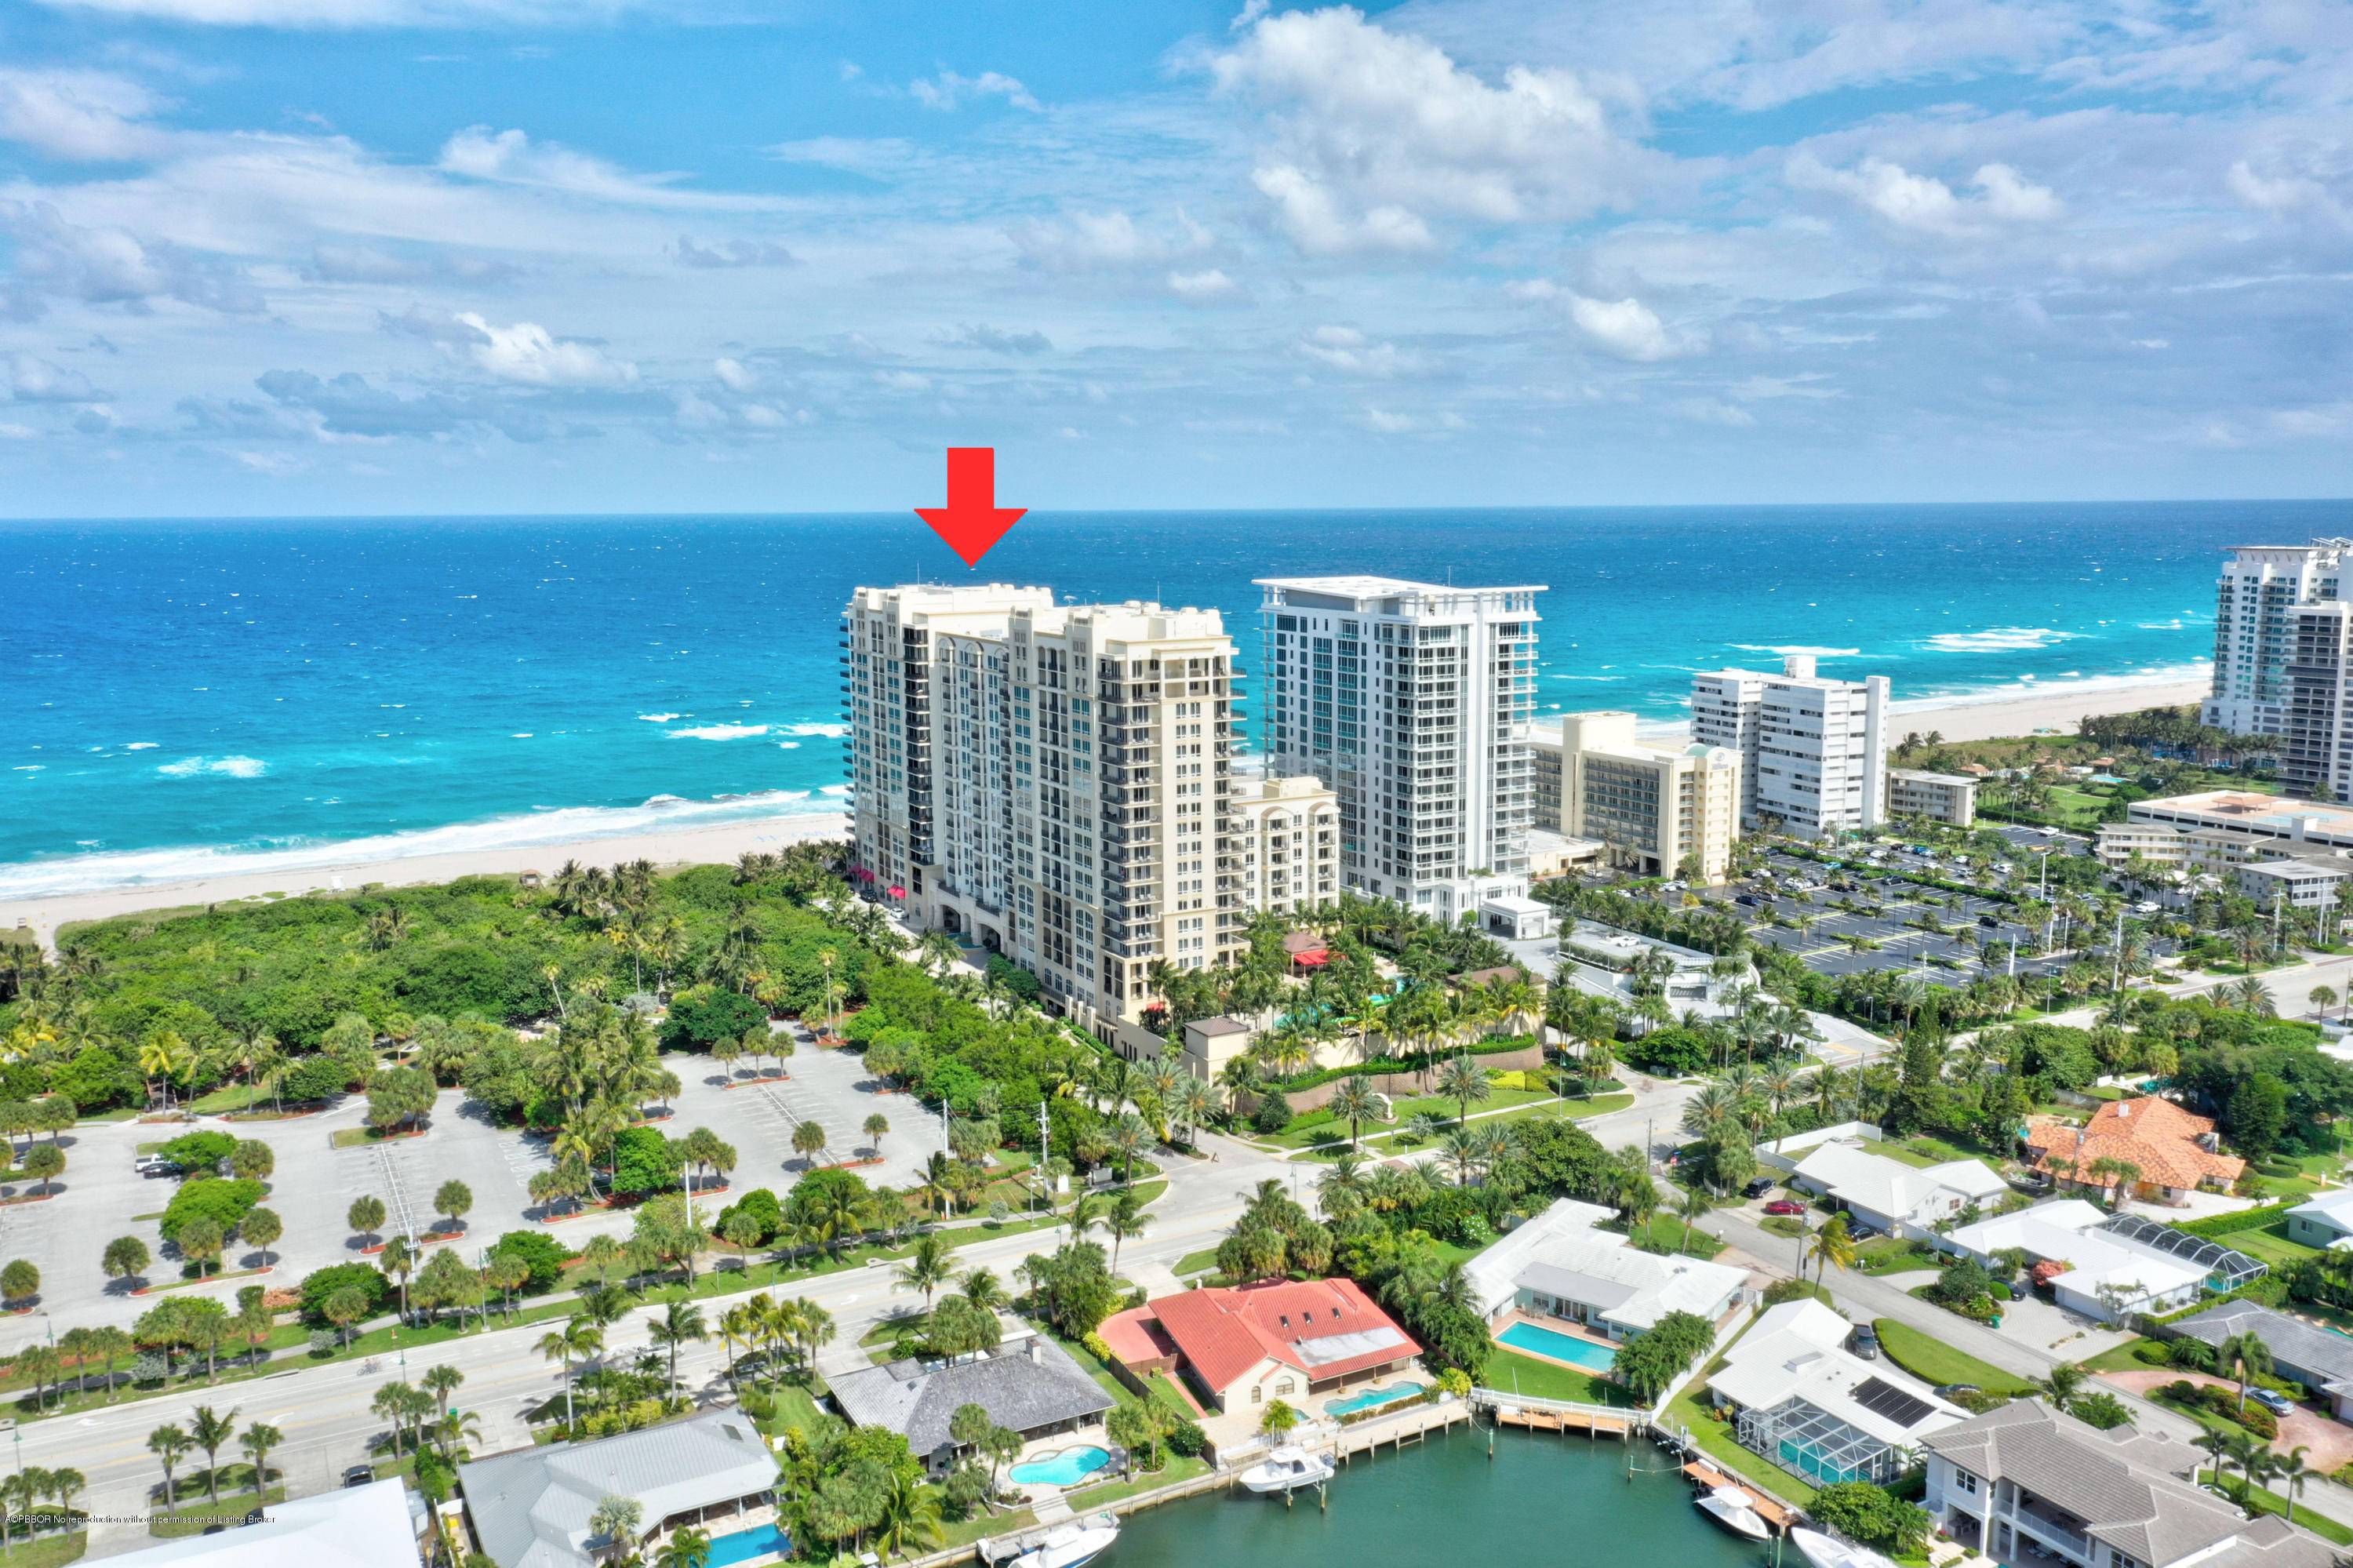 Live a resort lifestyle at the Singer Island Resort and Spa.